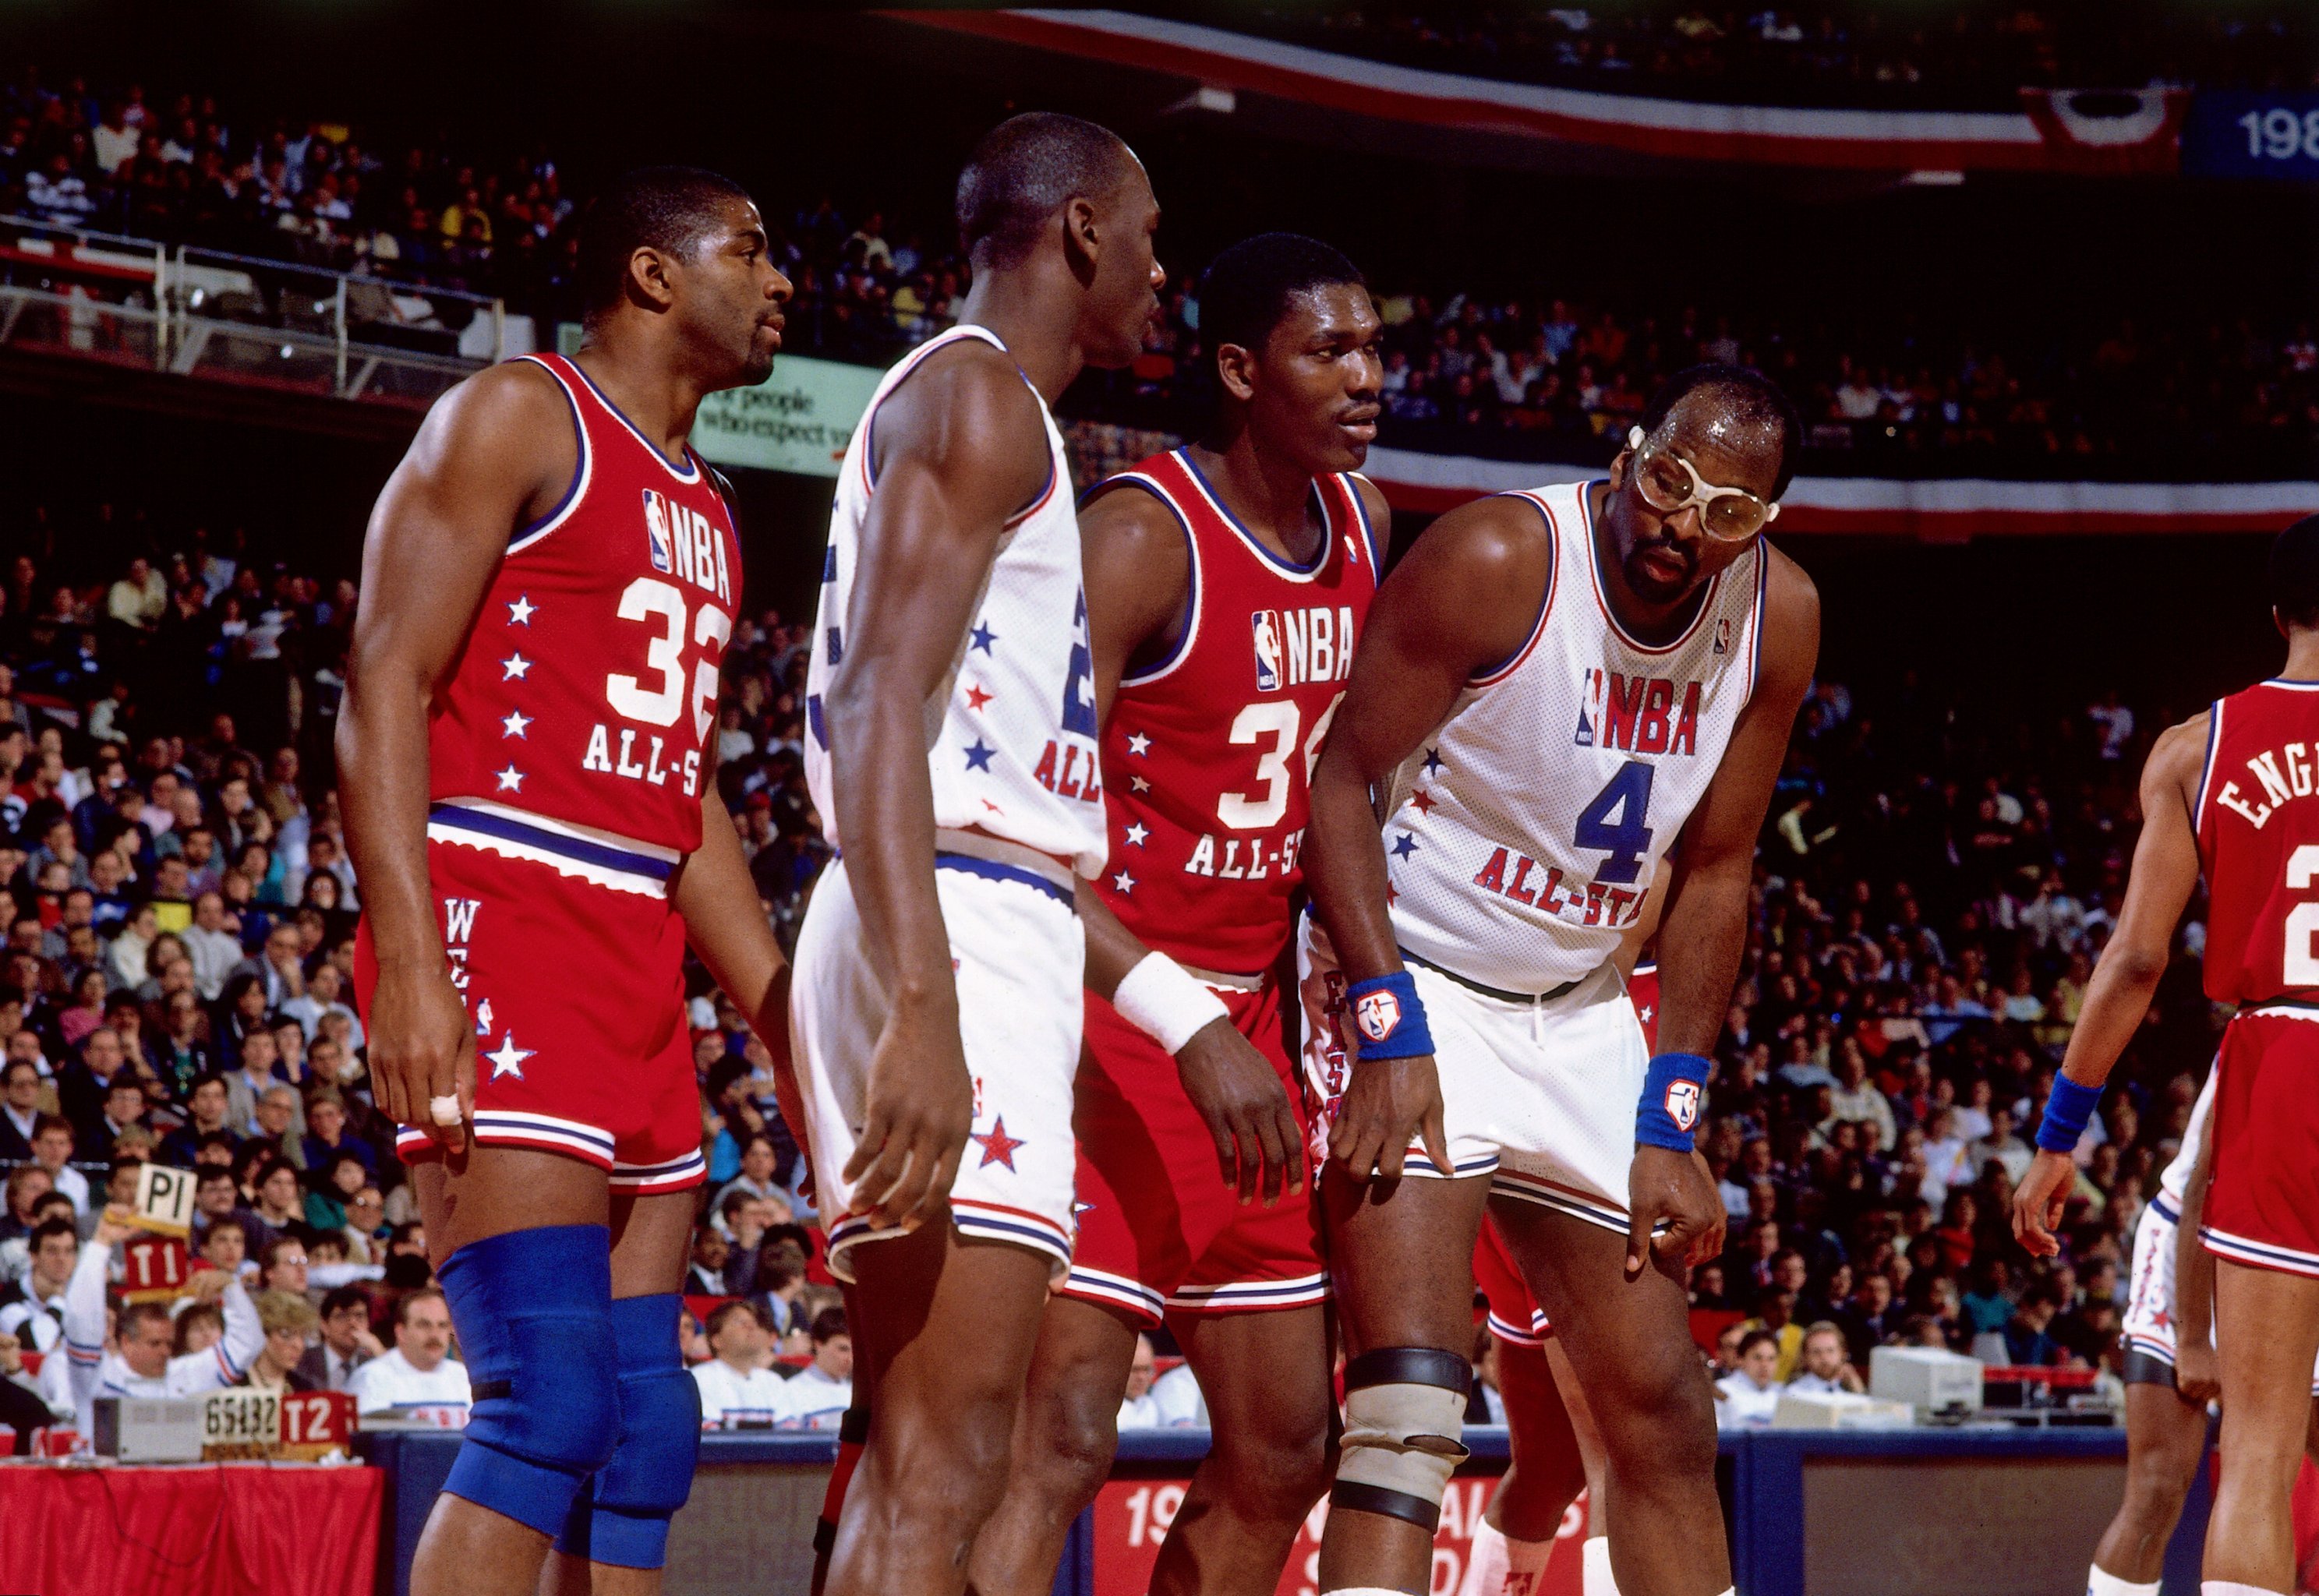 NBA All-Star game 1990 - VIDEO